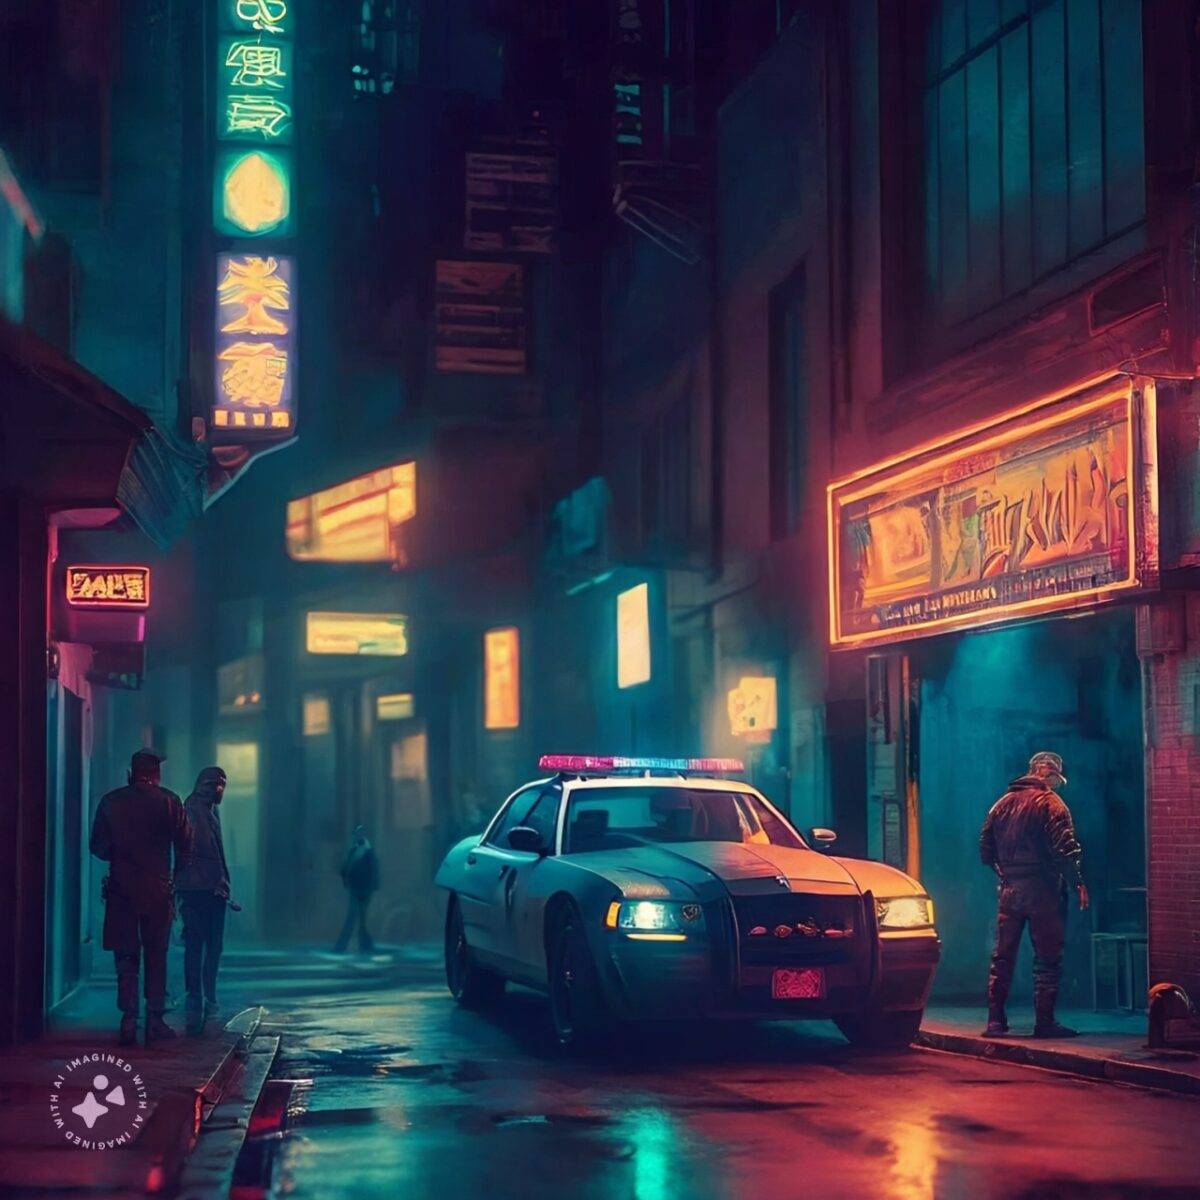 A-shady-backalley-in-a-cyberpunk-setting-with-neon-lights-advertisement-some-people-hanging-out-and-a-futuristic-police-car-on-the-street-scaled-1